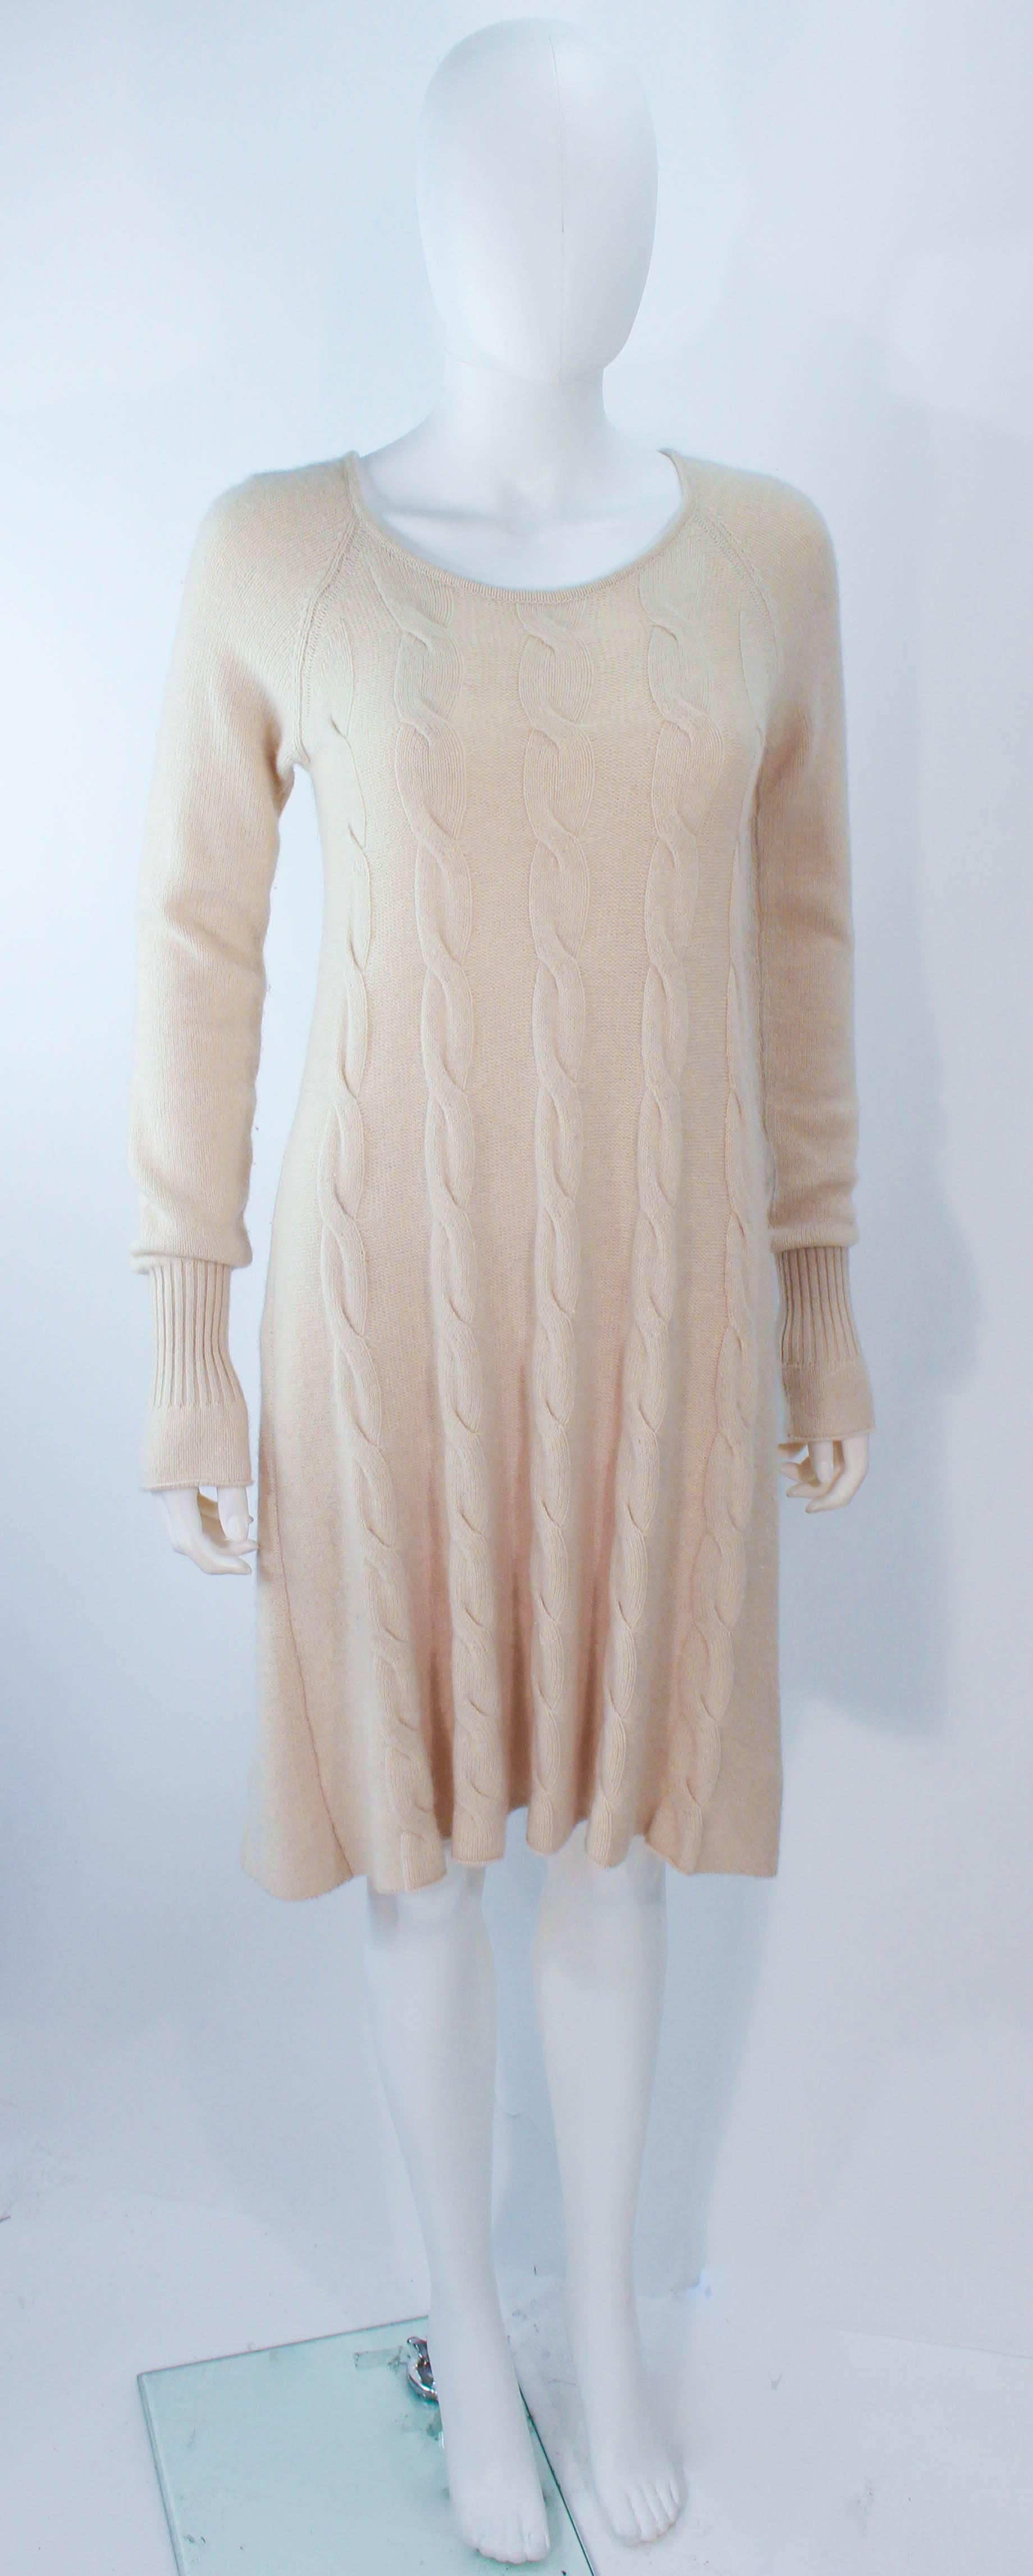 This Krizia dress is composed of the most supple cream cashmere. Features a classic knit pull over style with a slightly flared skirt. In excellent condition. 


**Please cross-reference measurements for personal accuracy. Size in description box is